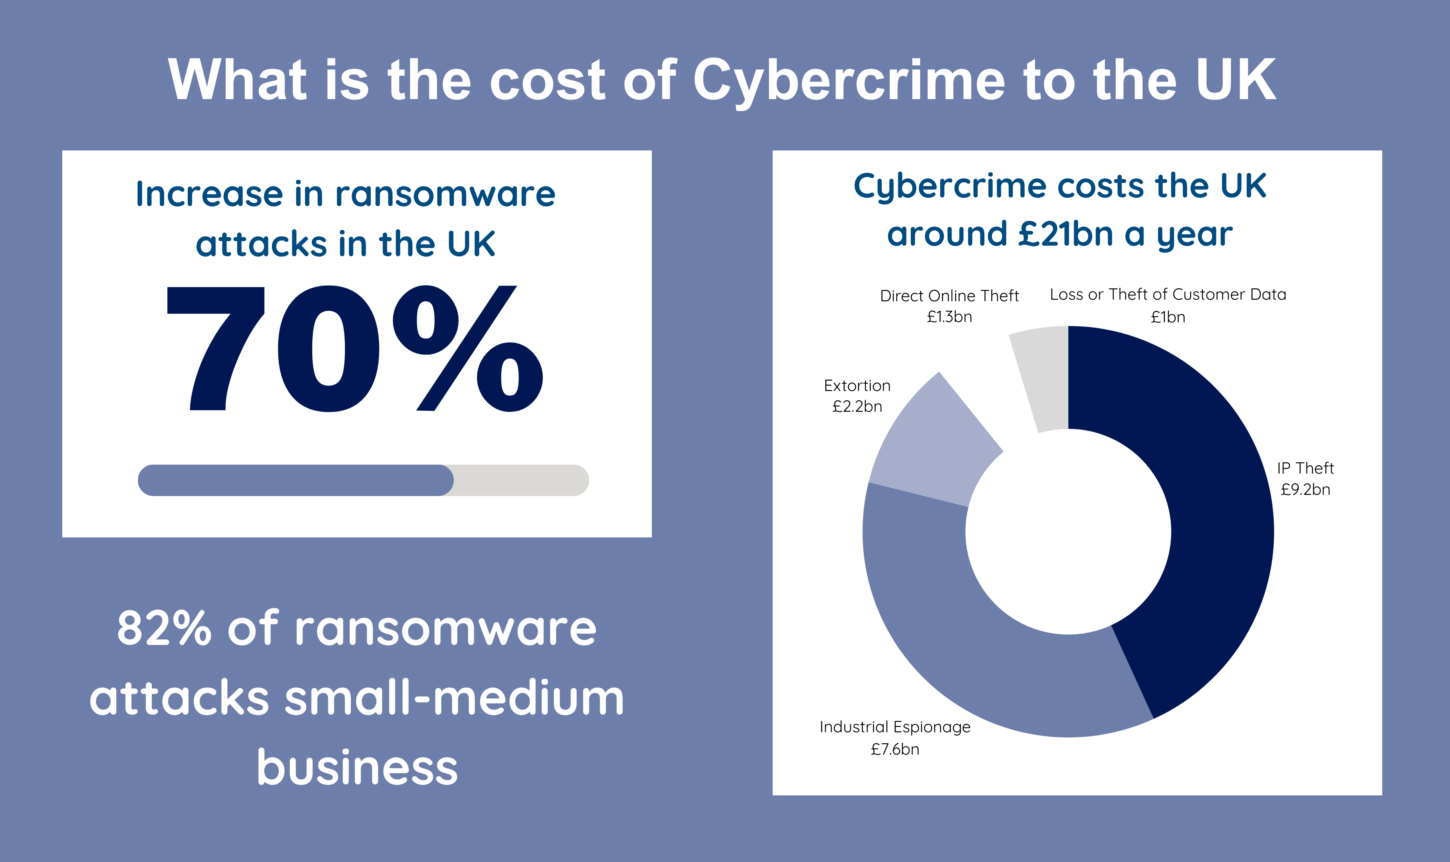 Cost of cyber-attacks to the UK
70% increase in ransomware attacks in the UK, 82% of which affects small-medium business. Cybercrime costs the UK around £21bn a year.